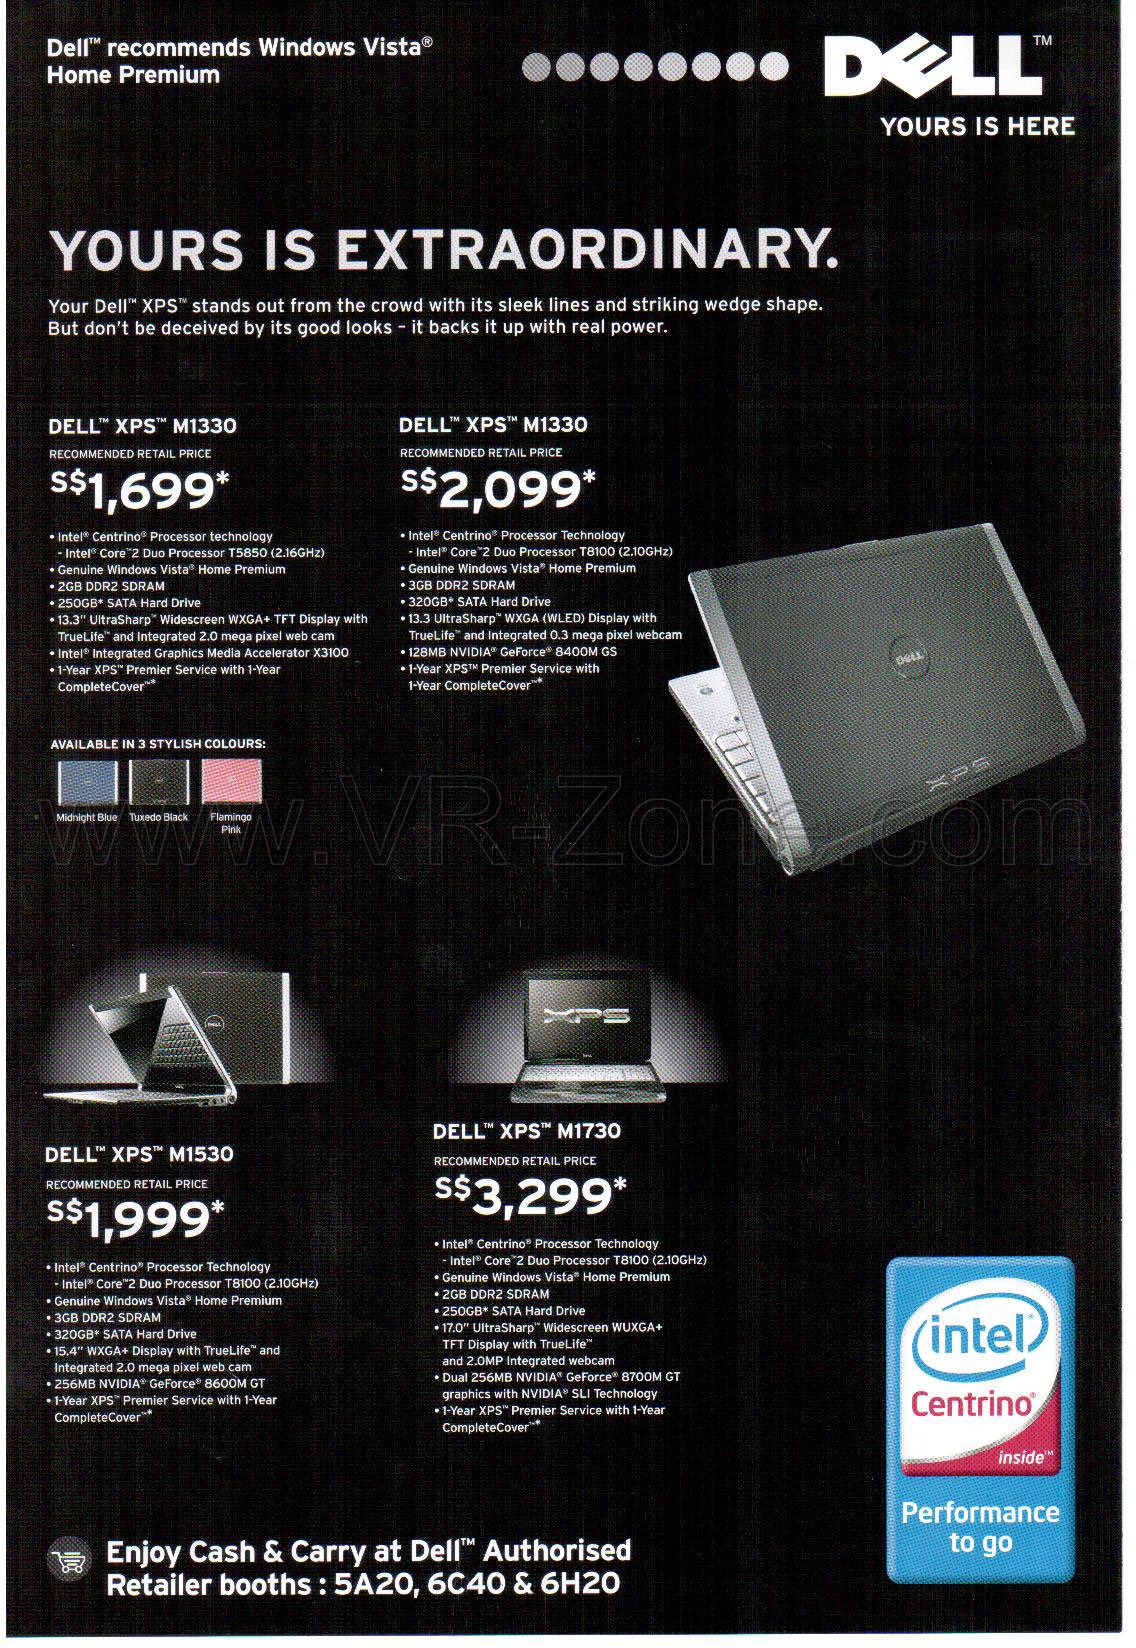 Sitex 2008 price list image brochure of Dell Xps 2